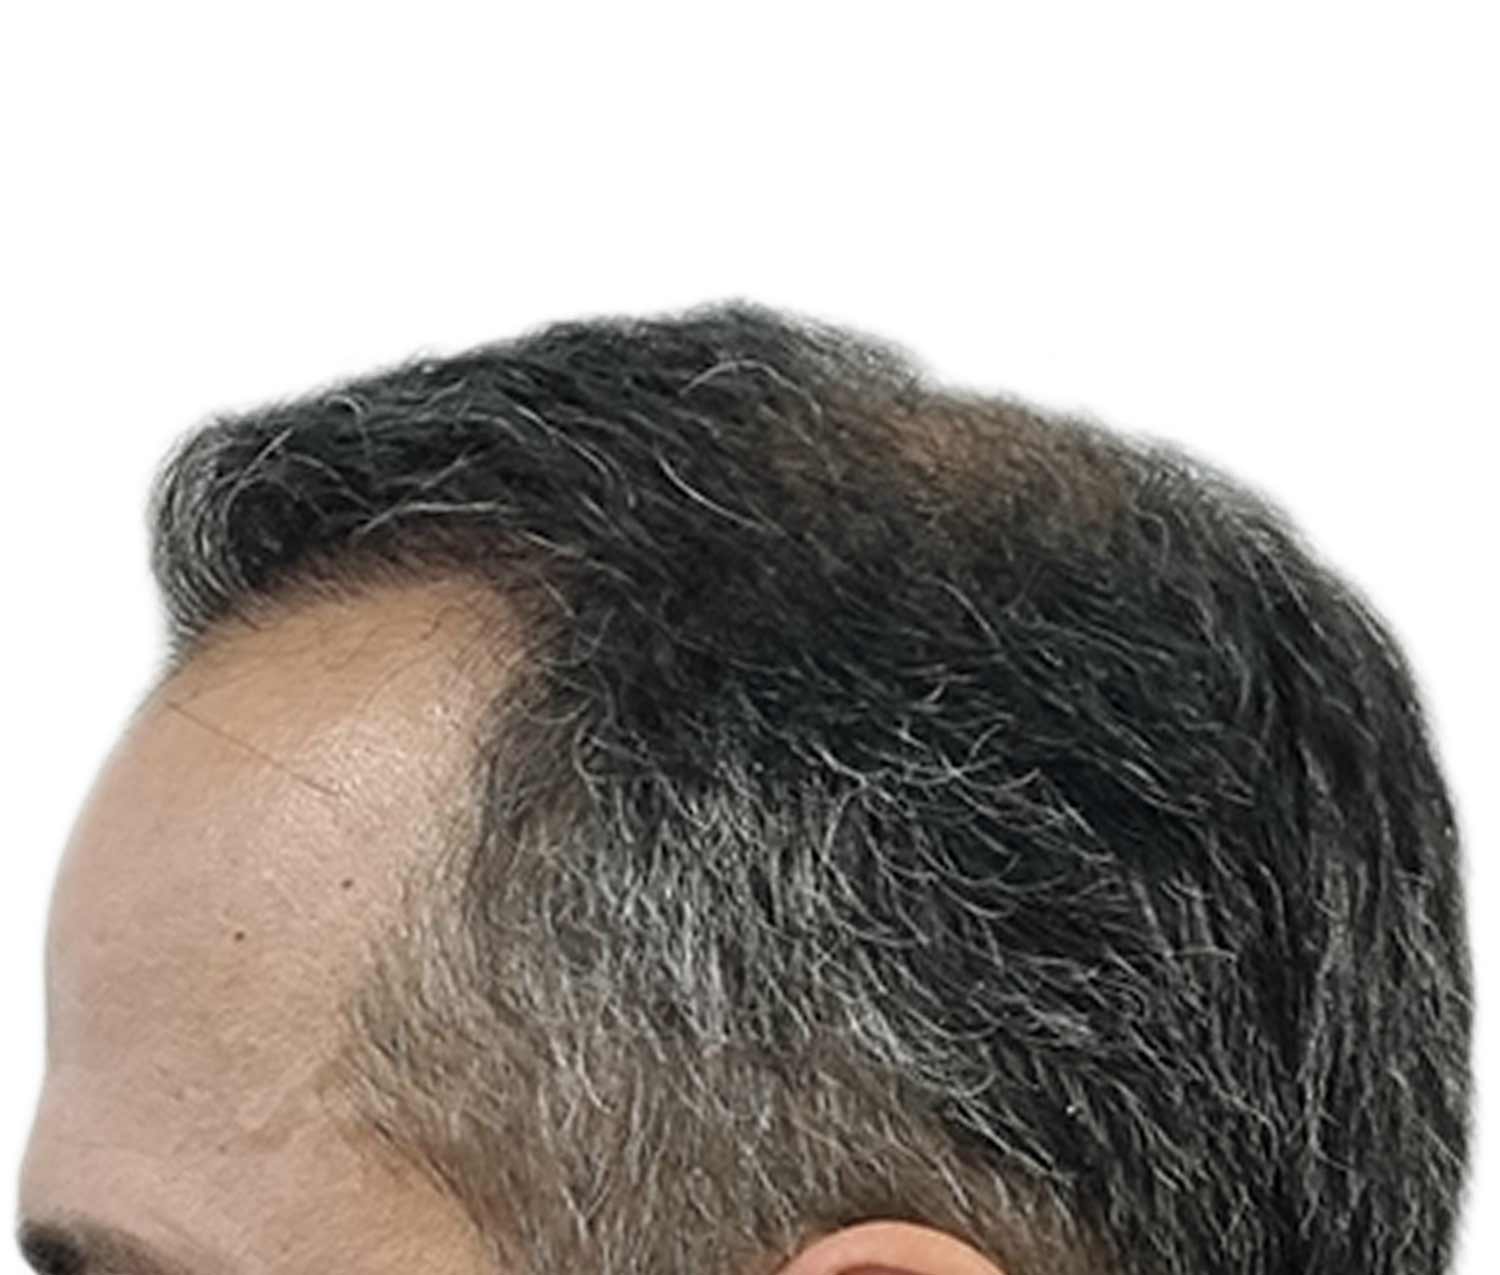 a close up of a man 's head with gray hair .